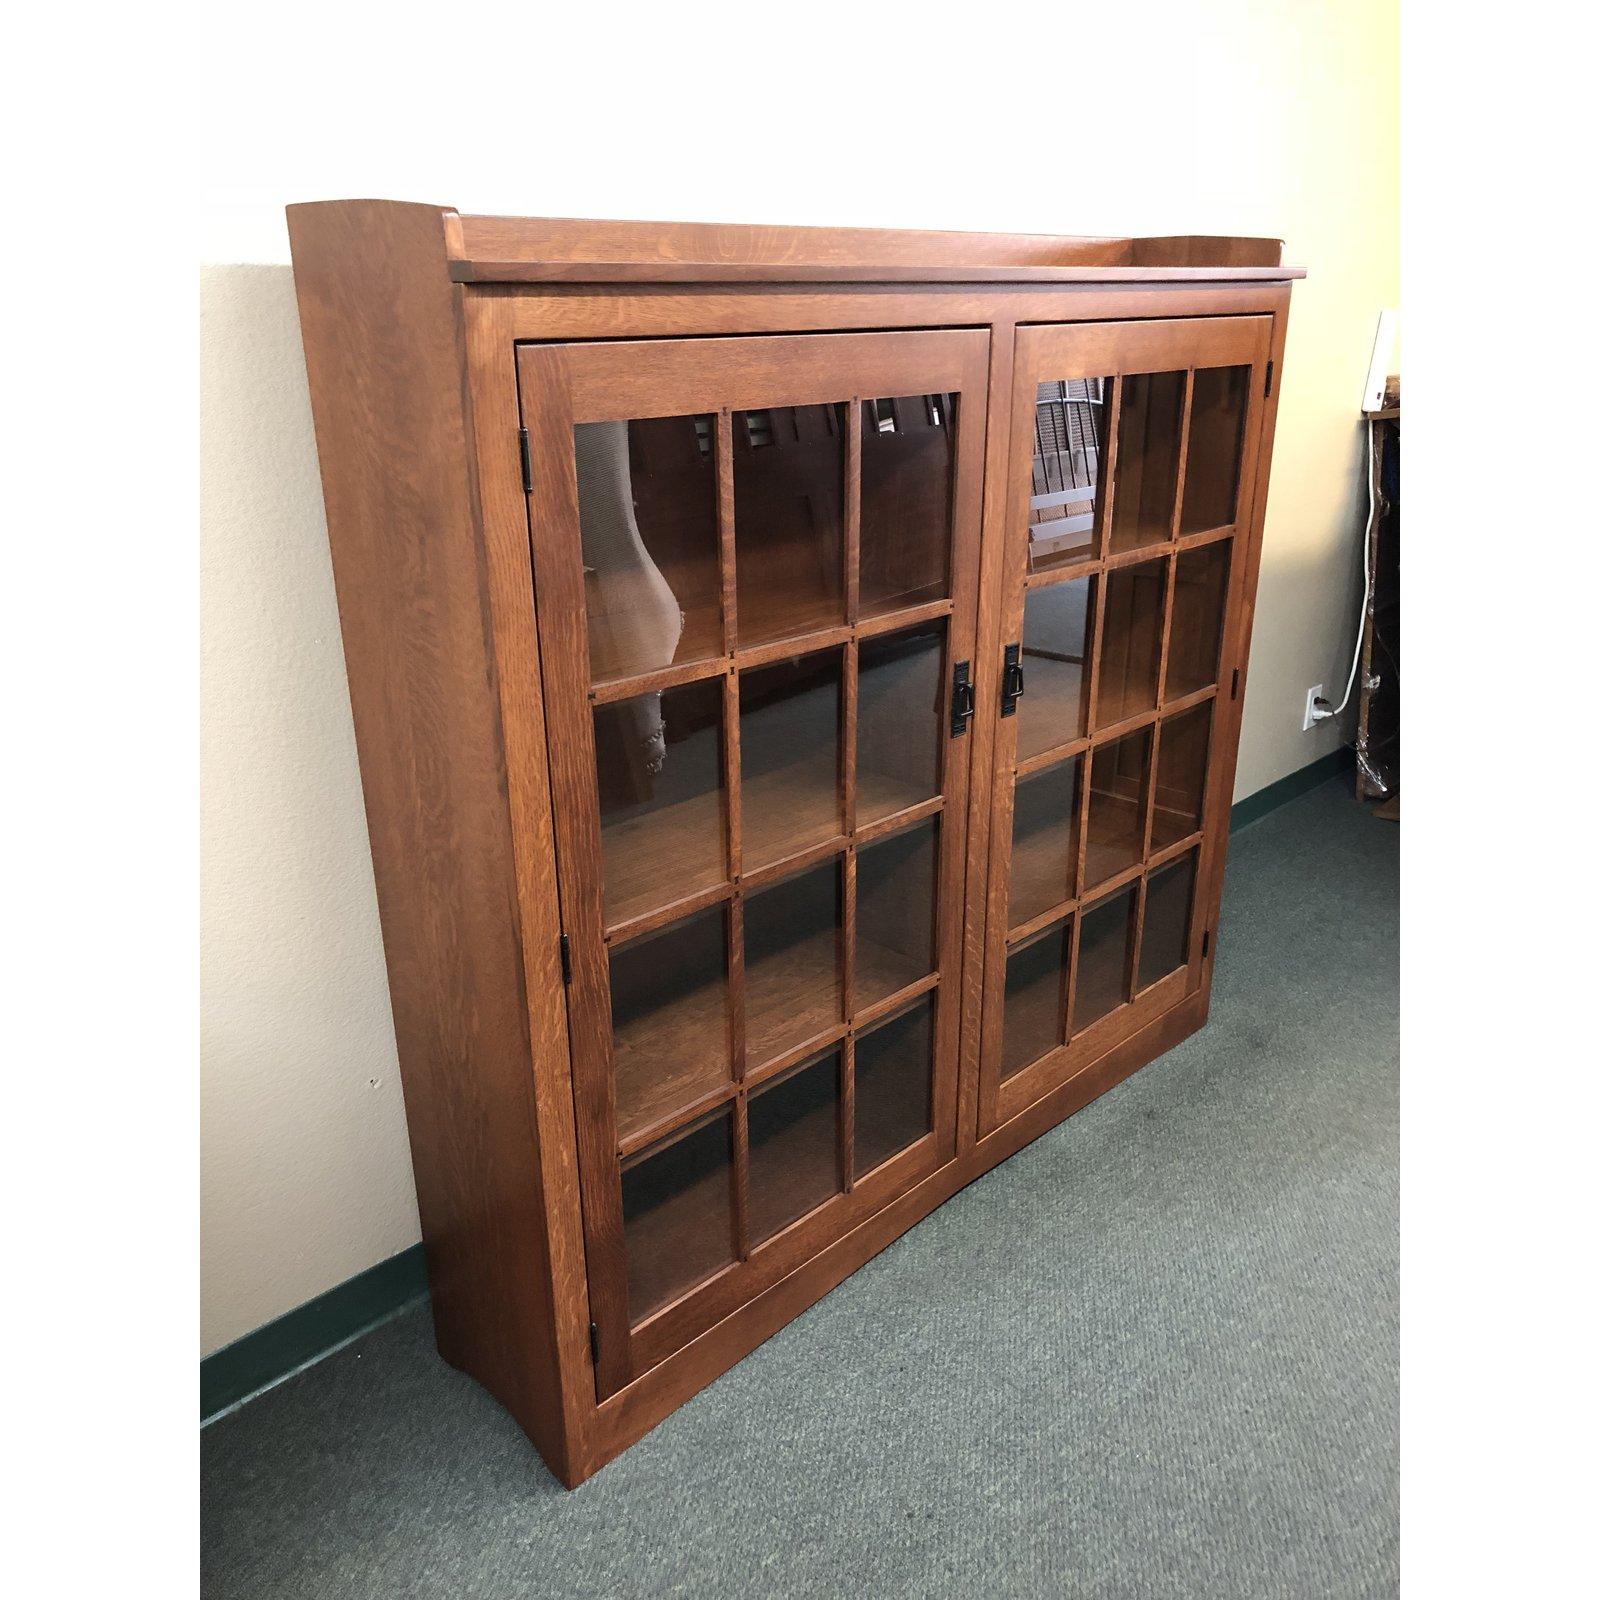 A double door cabinet by Honeybee Furniture, straight from a designer showroom. Built of solid white oak with intricate craftsman details. This lovely cabinet has six adjustable shelves. Made in USA to stand the tests of time.

